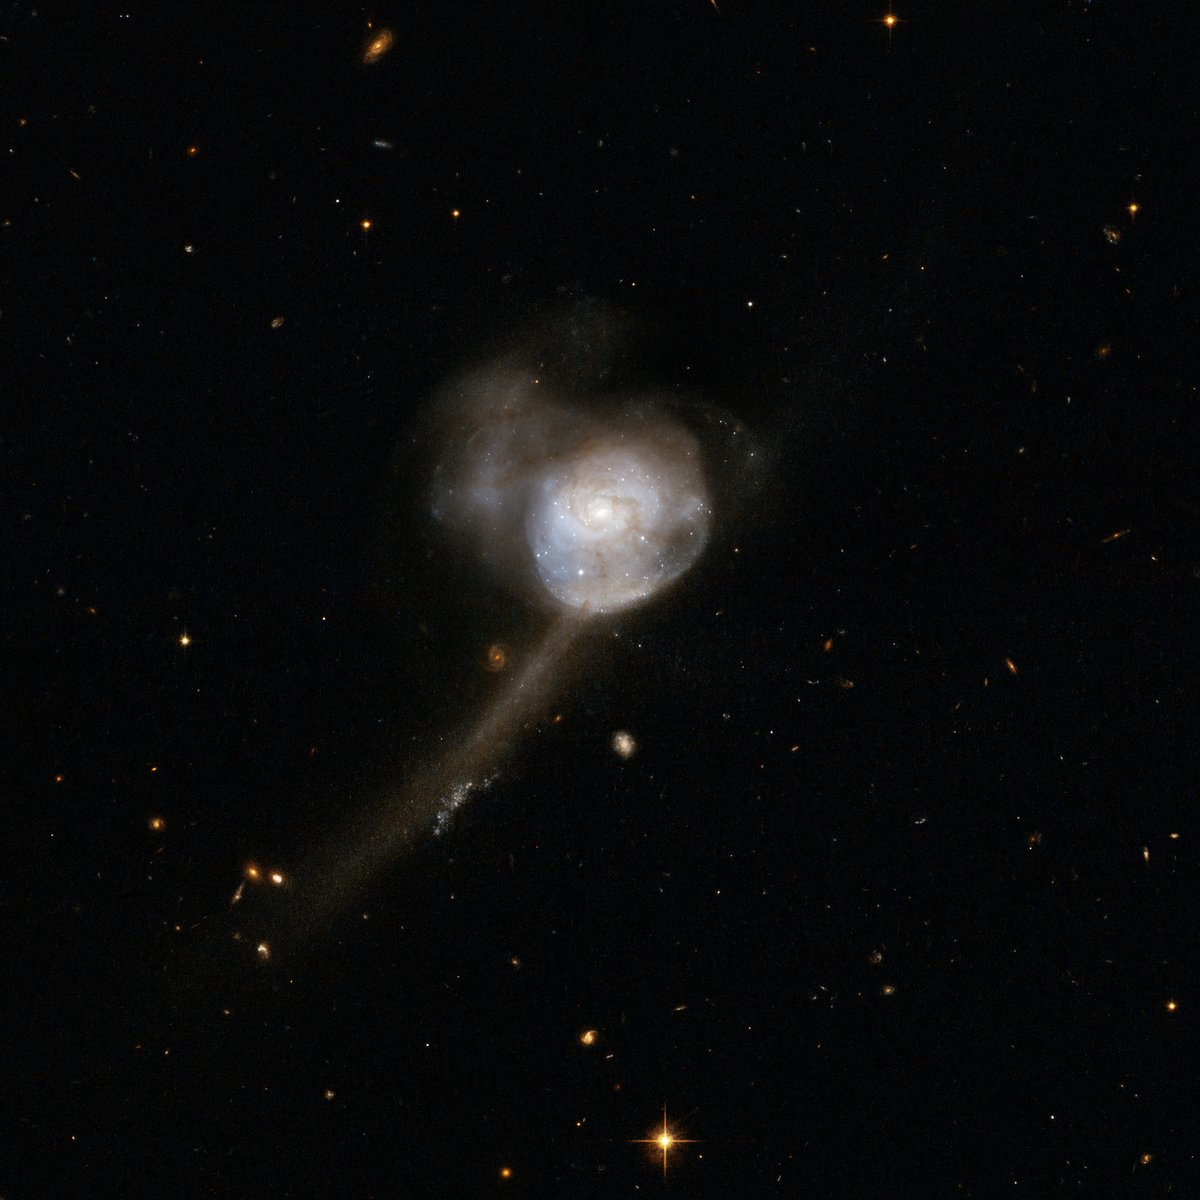 A dandelion in space? Not quite. This “puff” was captured by Hubble in 2002 and formed by two disk galaxies merging. Some clues of this collision remain: the faint tidal tails of the former galaxies. Learn more: bit.ly/3U5JaC8